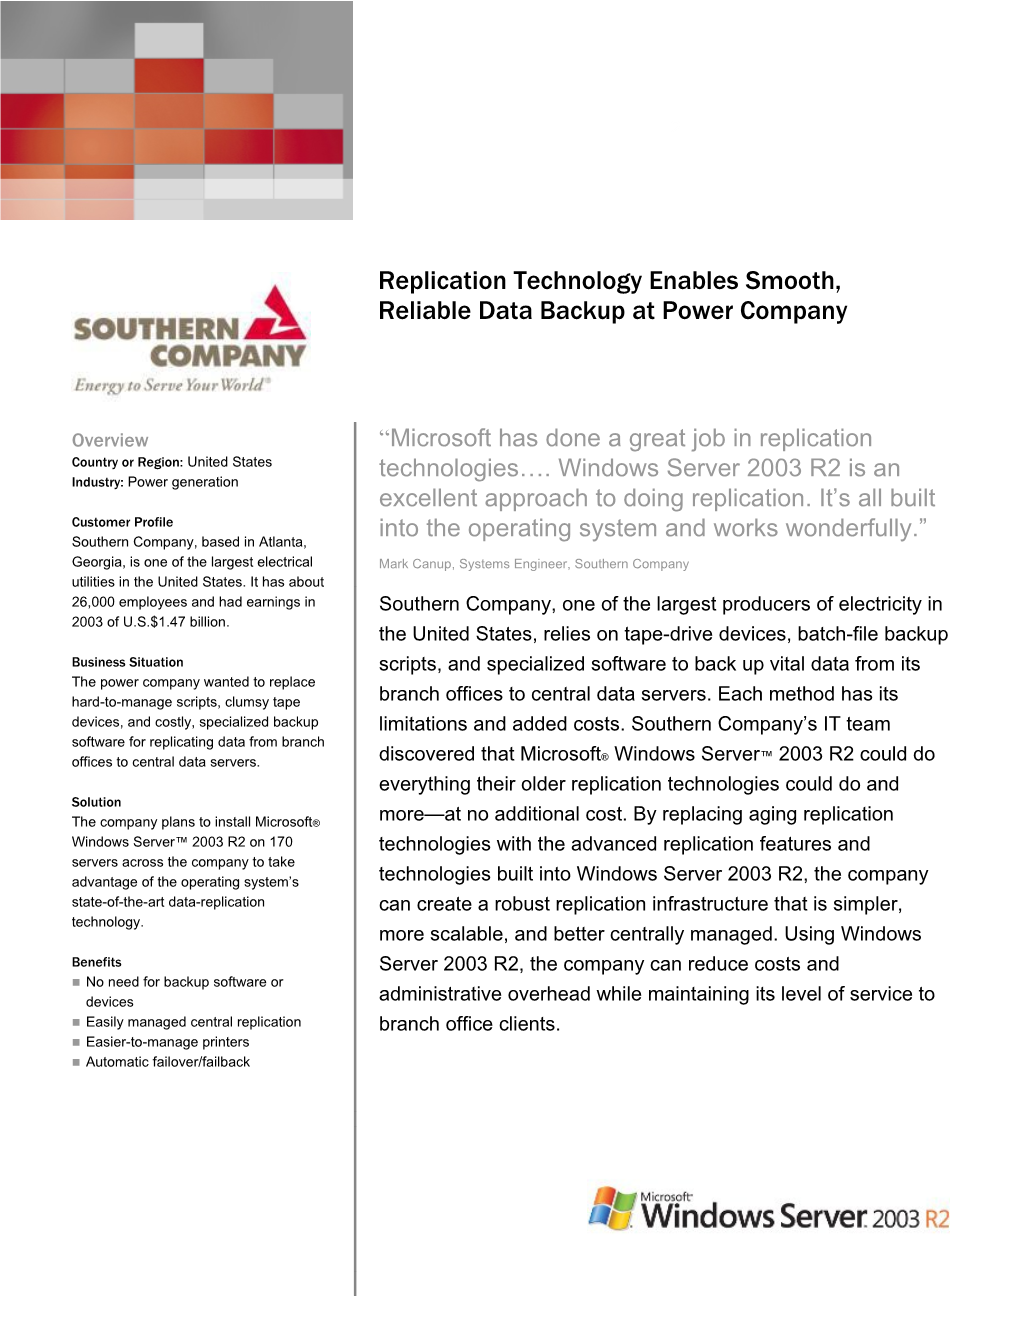 Replication Technology Enables Smooth, Reliable Data Backup at Power Company